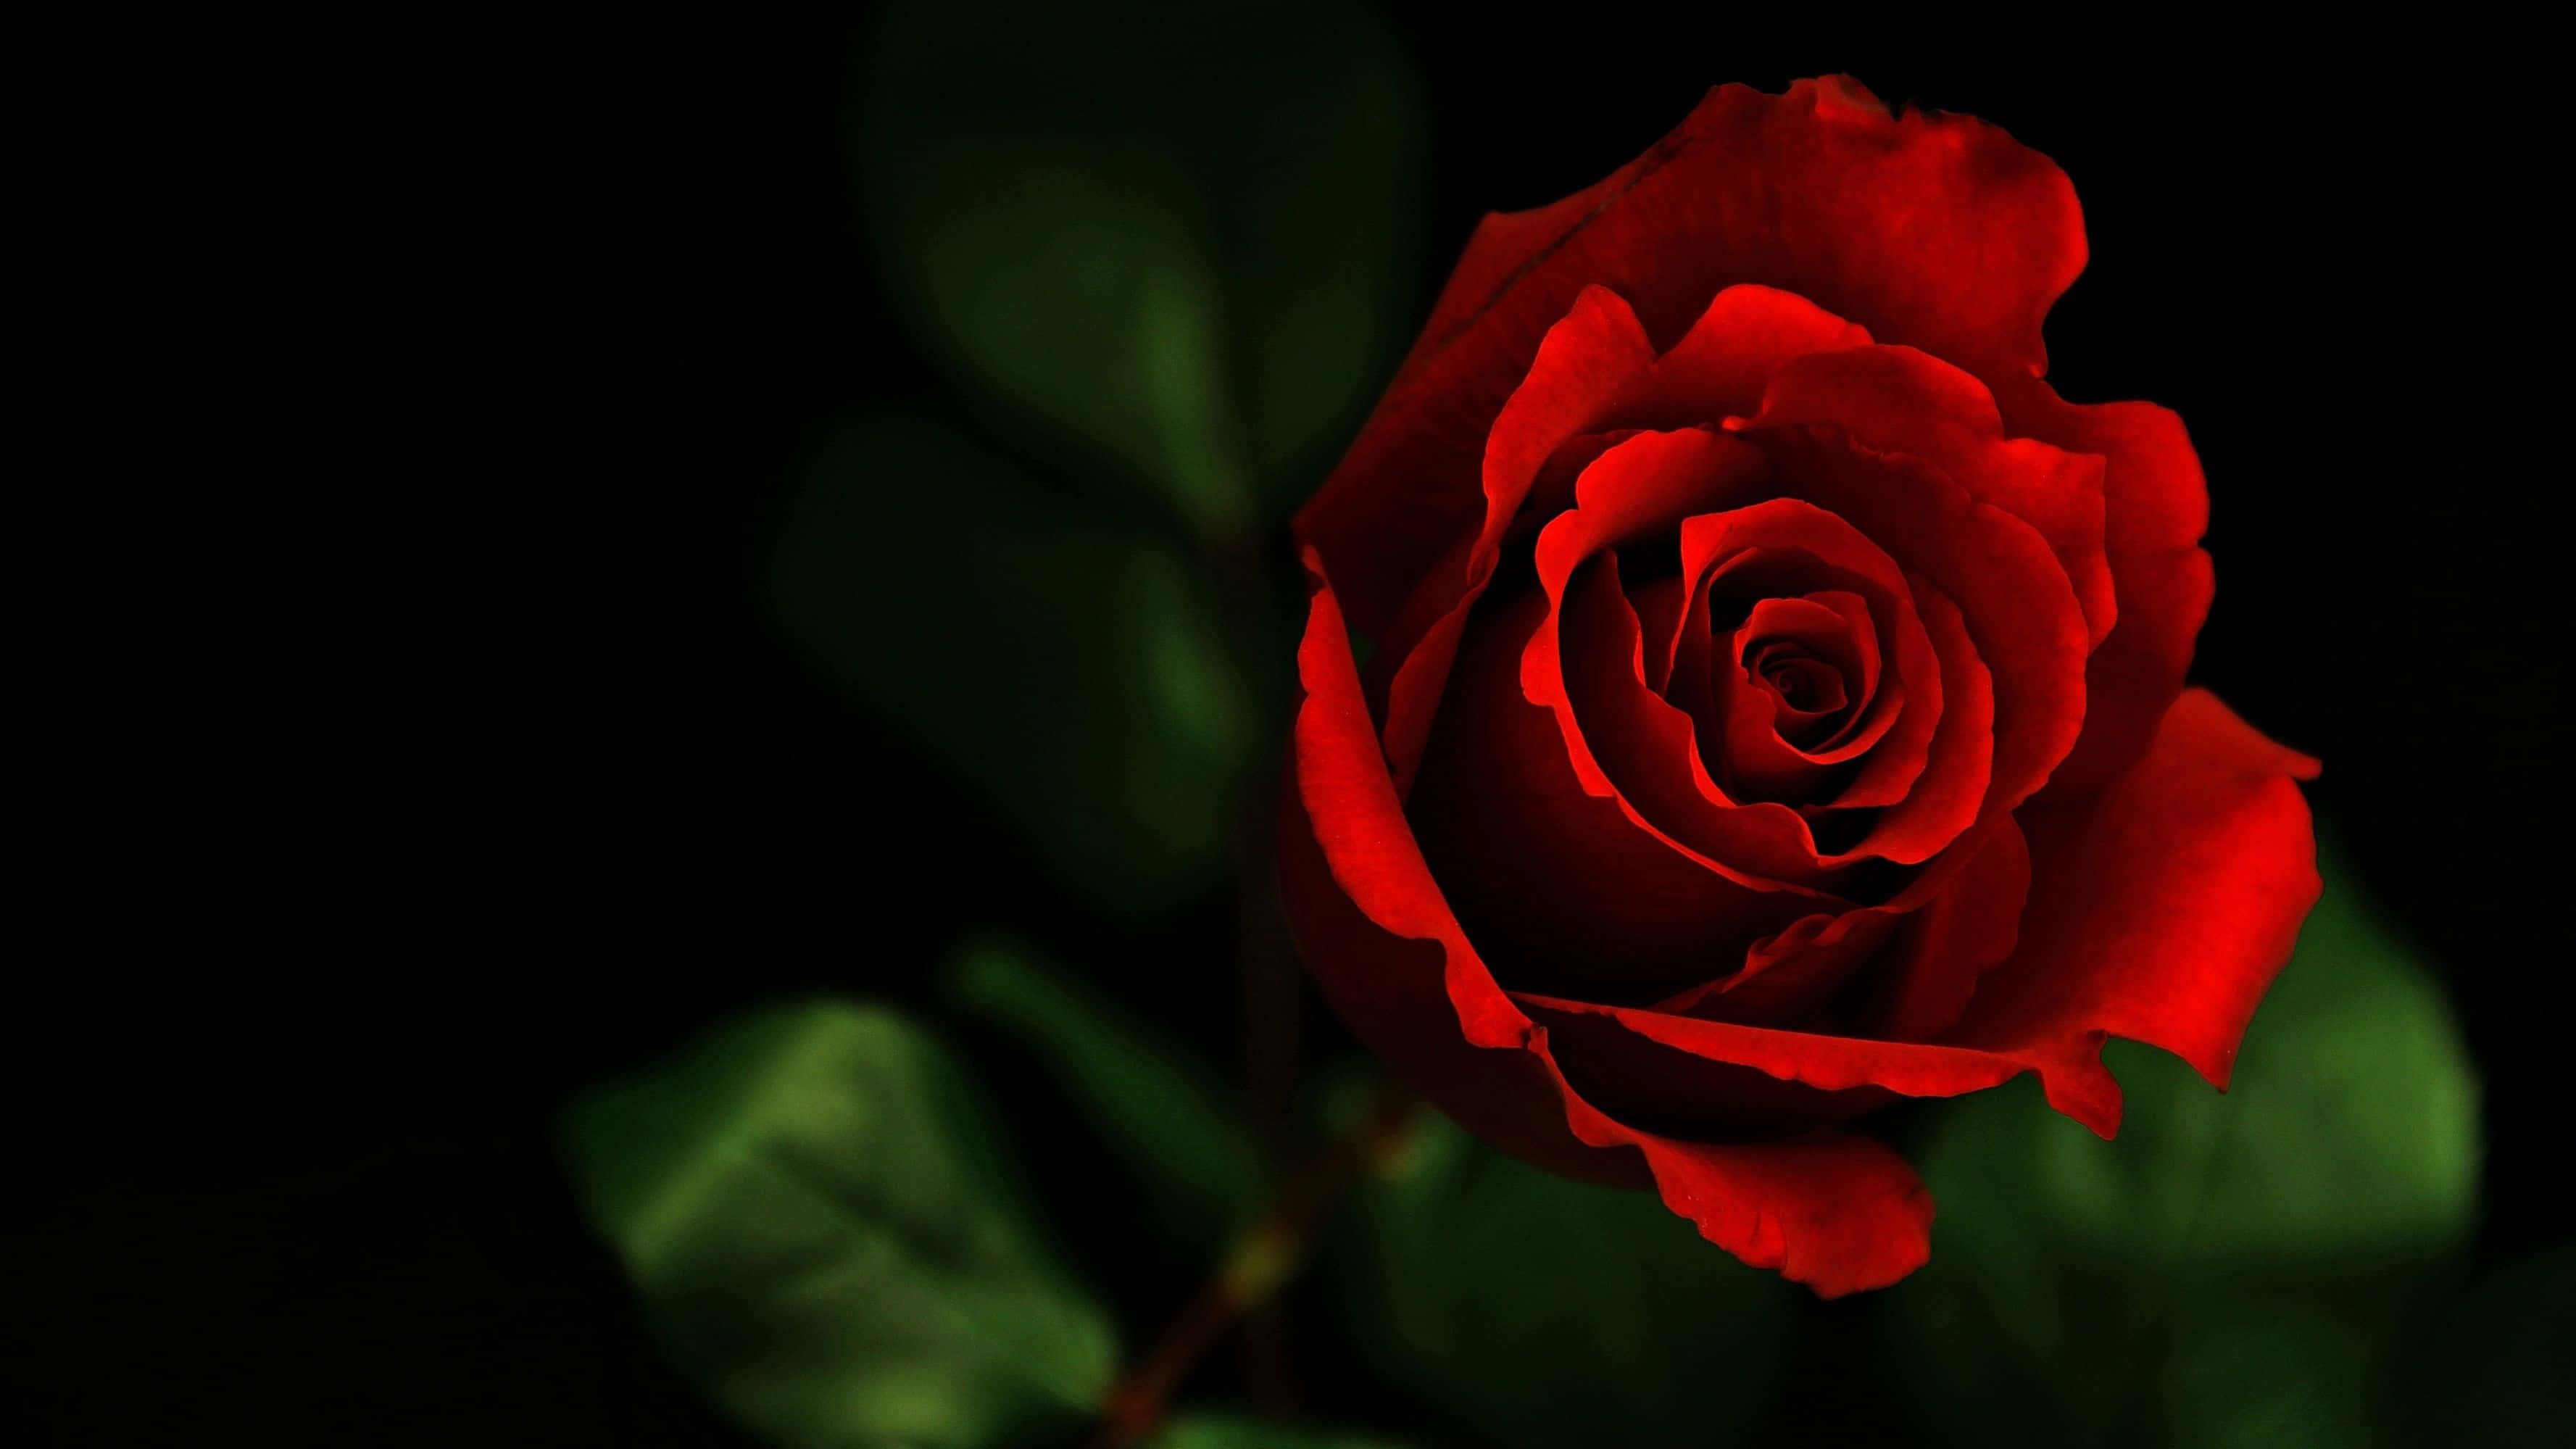 A Red Rose Is Shown Against A Black Background